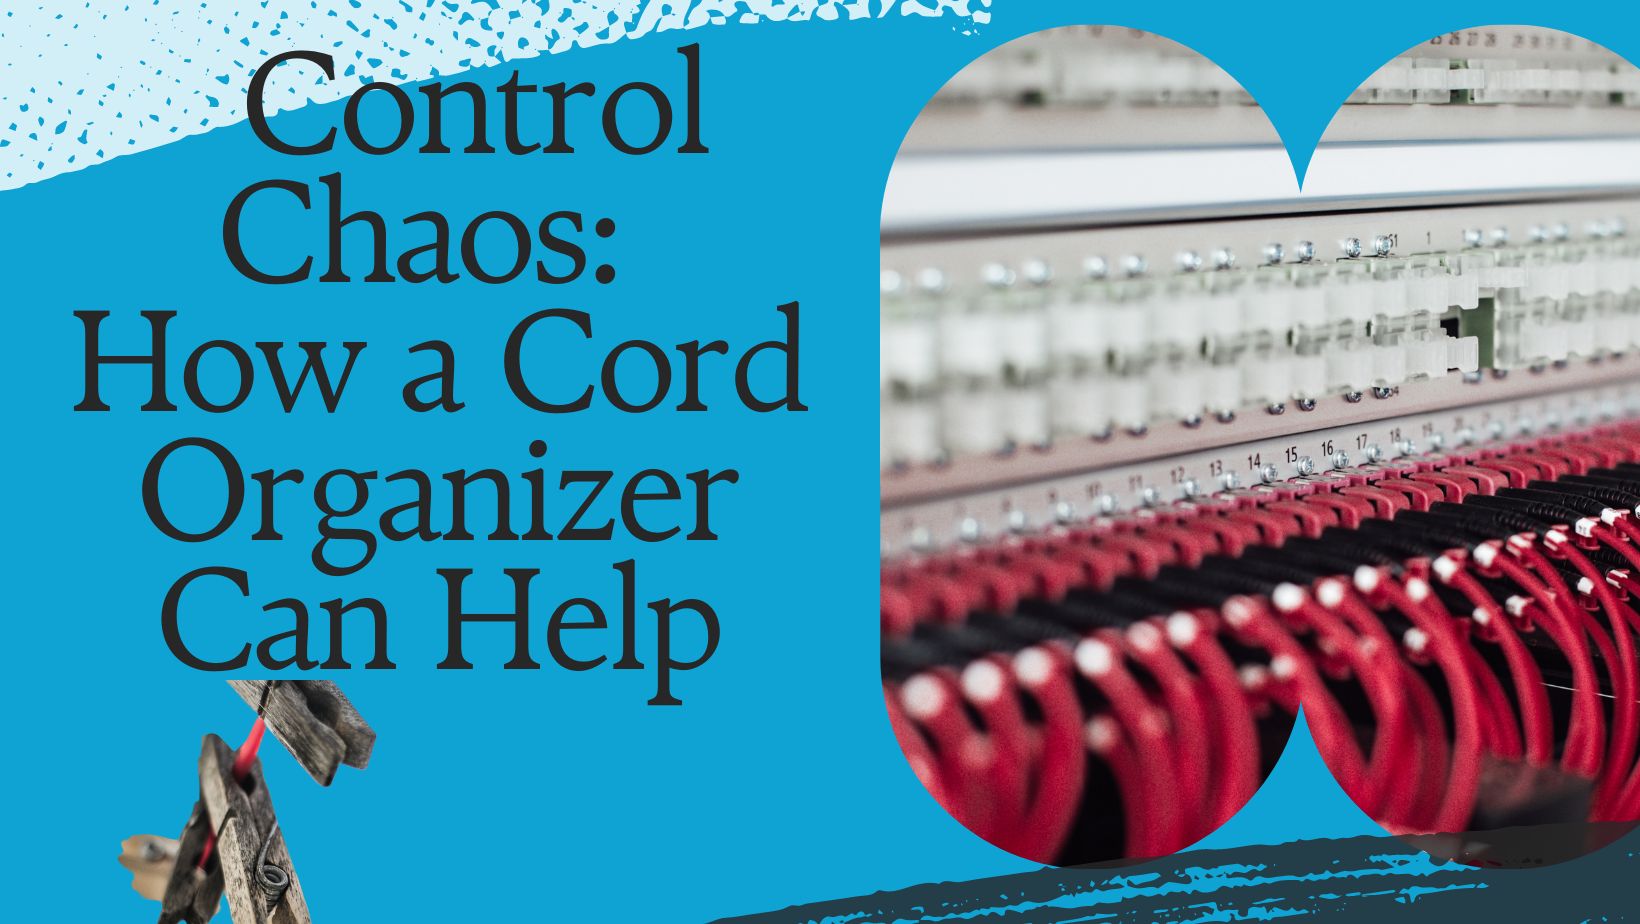 Getting Control of the Chaos: How a Cord Organizer Can Help